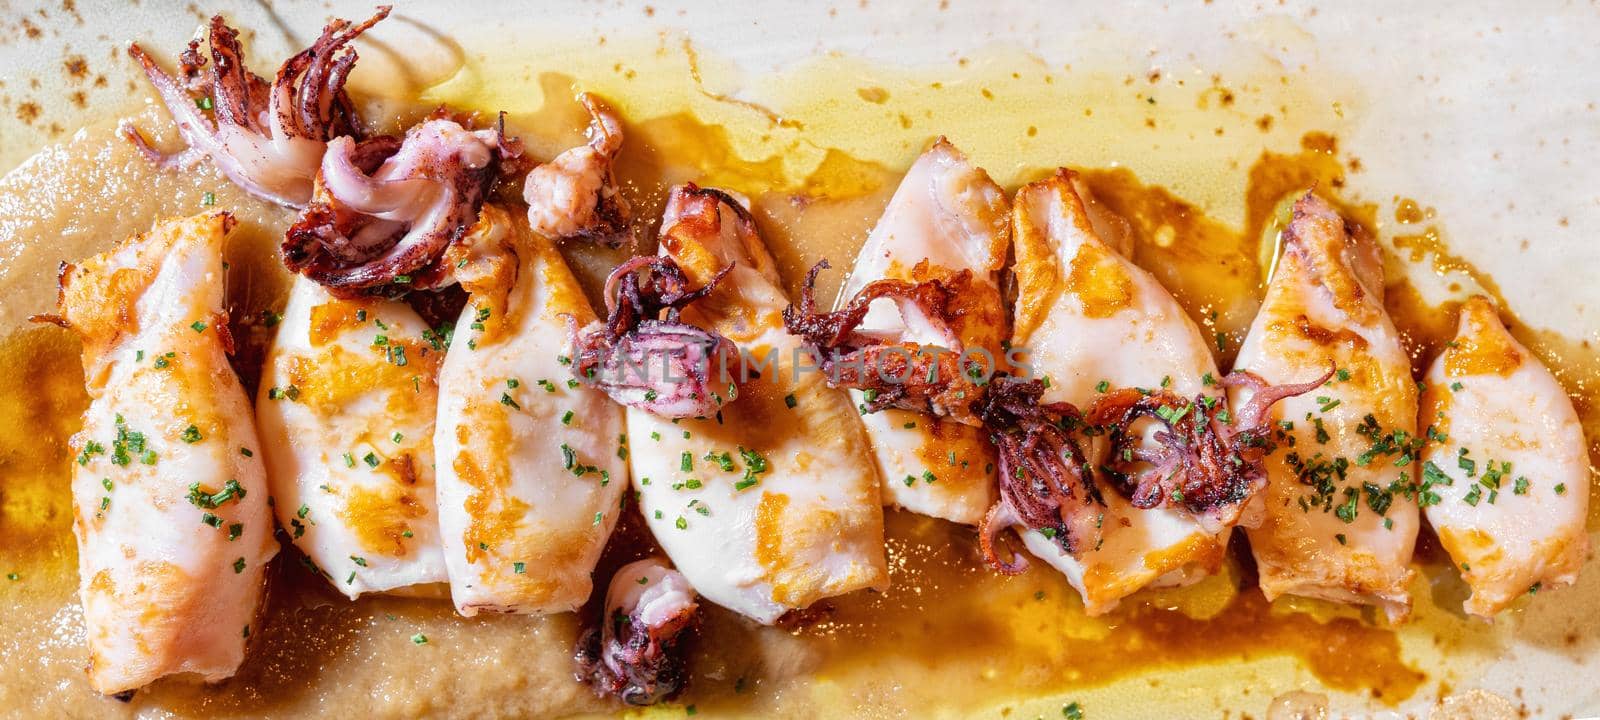 Directly above view of a delicious plate of grilled squid with sauce. by HERRAEZ